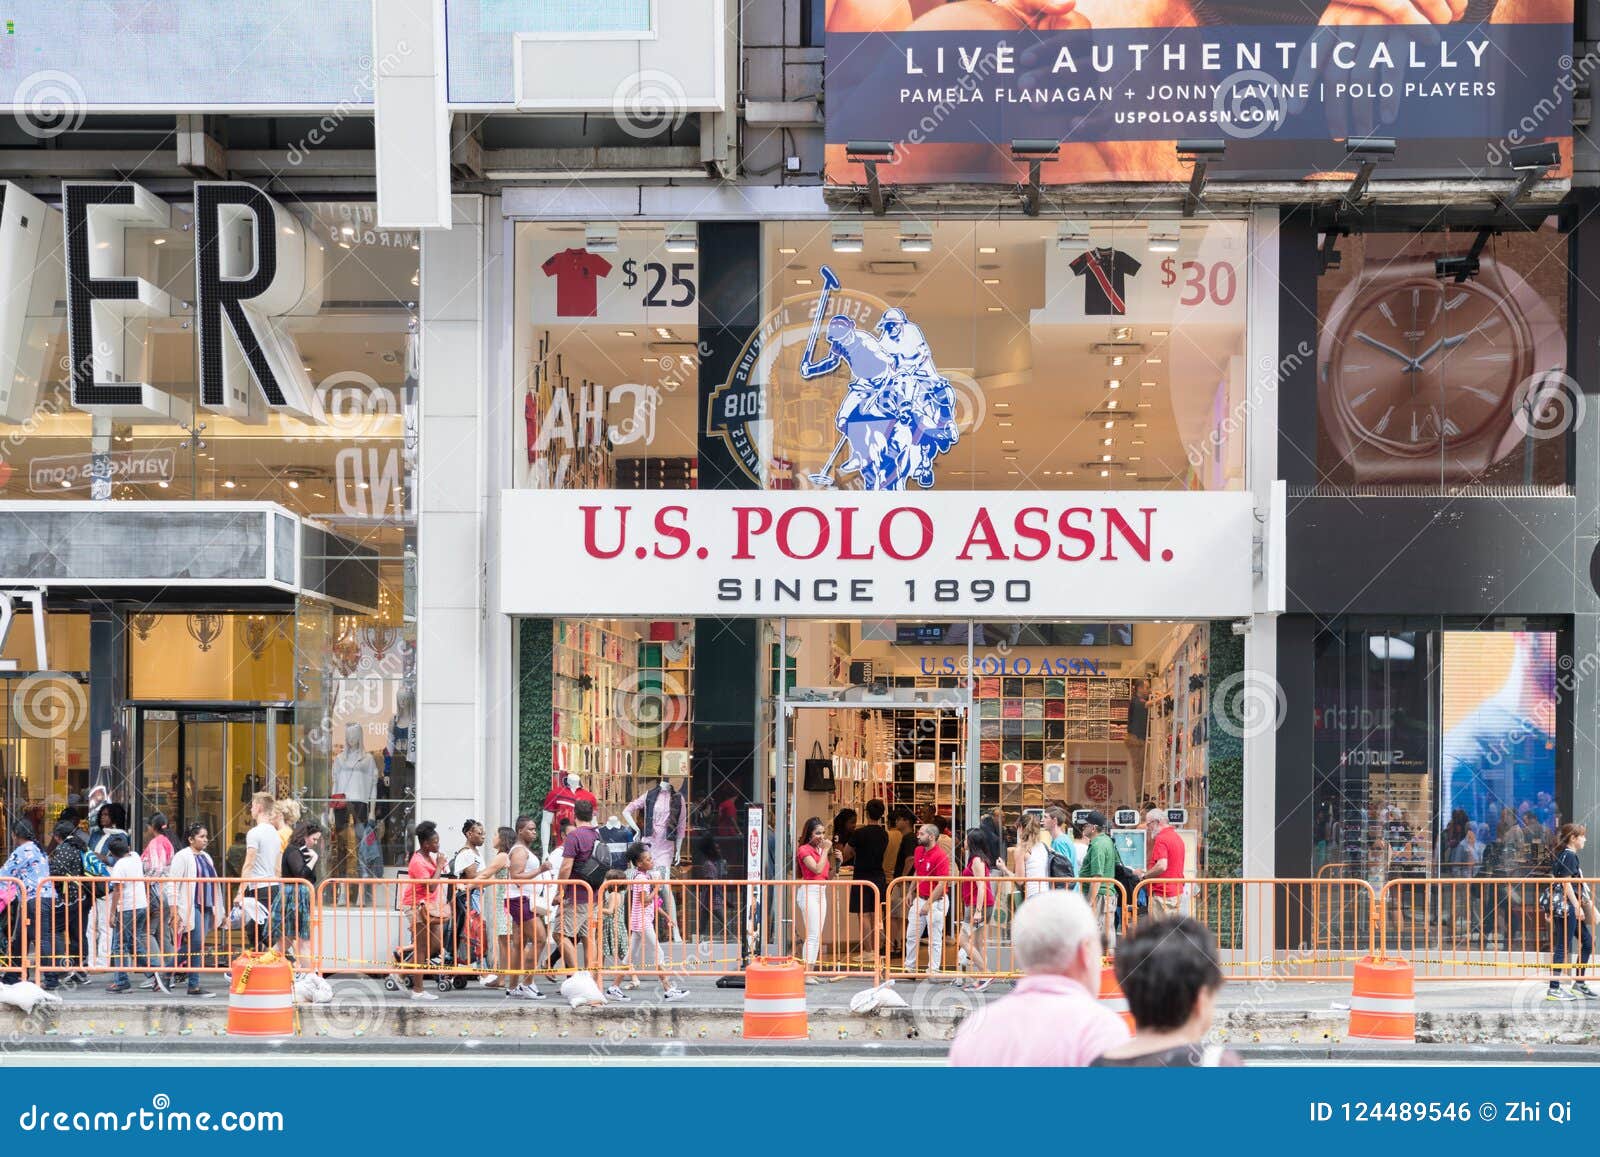 new-york-united-states-august-us-polo-assn-store-clothes-city-brand-u-s-belongs-uspa-properties-subsidiary-nonprofit-124489546.jpg